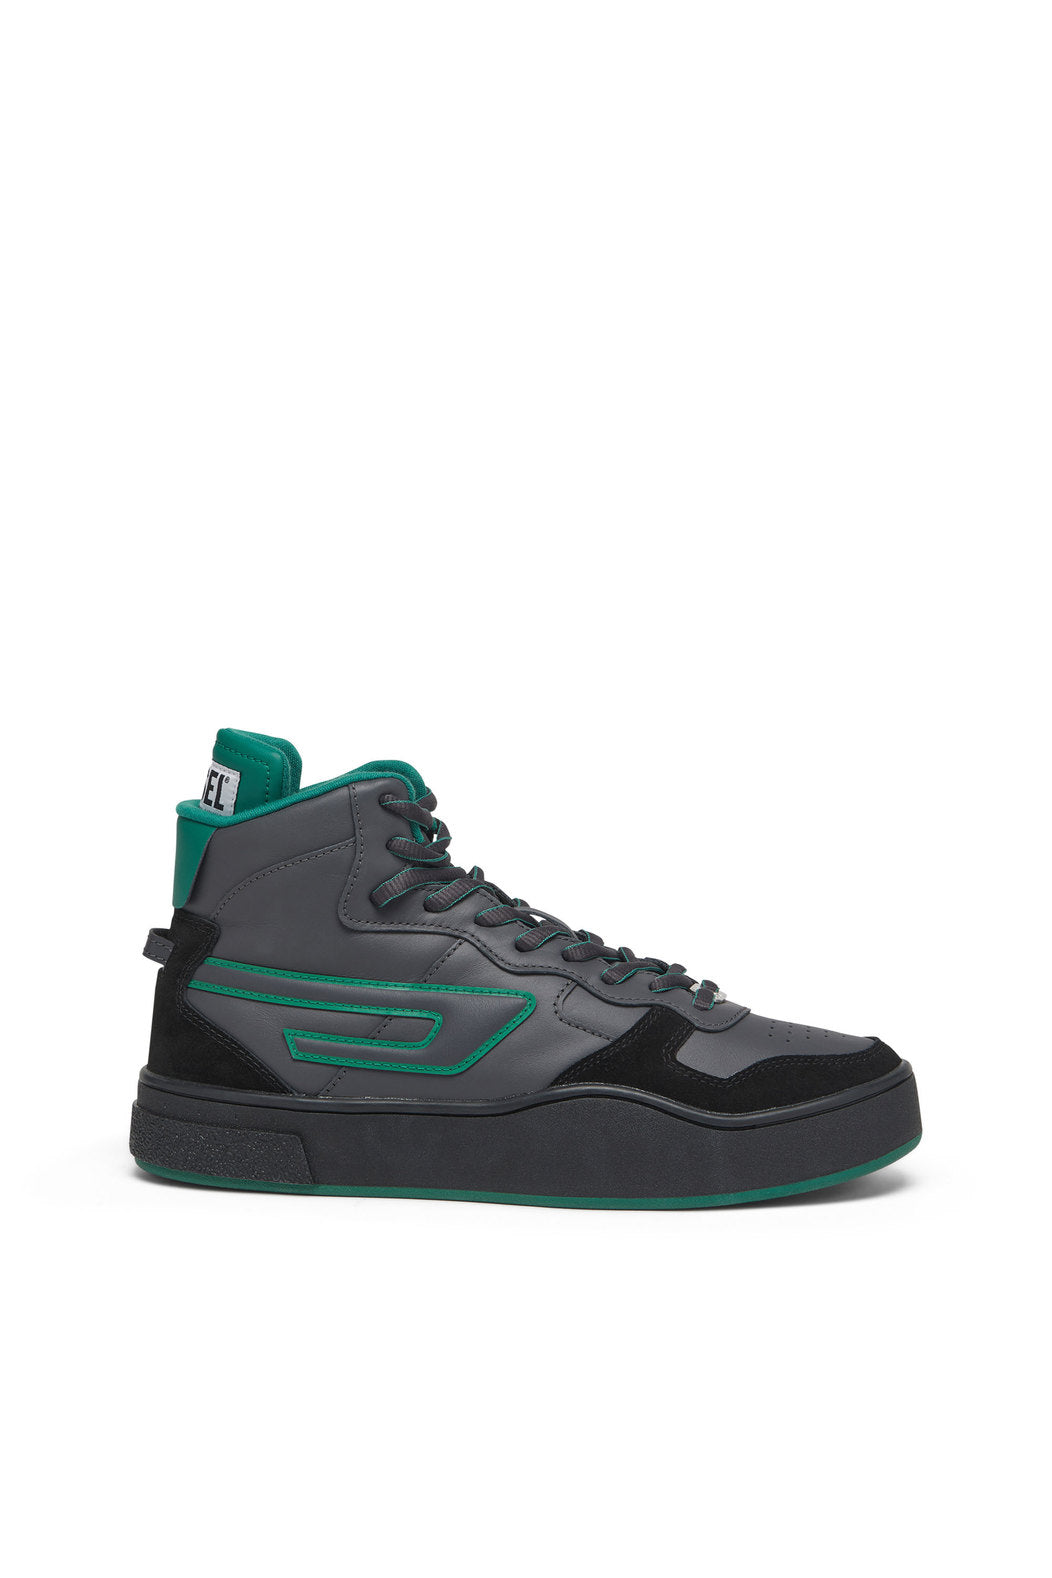 Diesel S-UKIYO MID X HIGH-TOP SNEAKERS IN LEATHER AND SUEDE